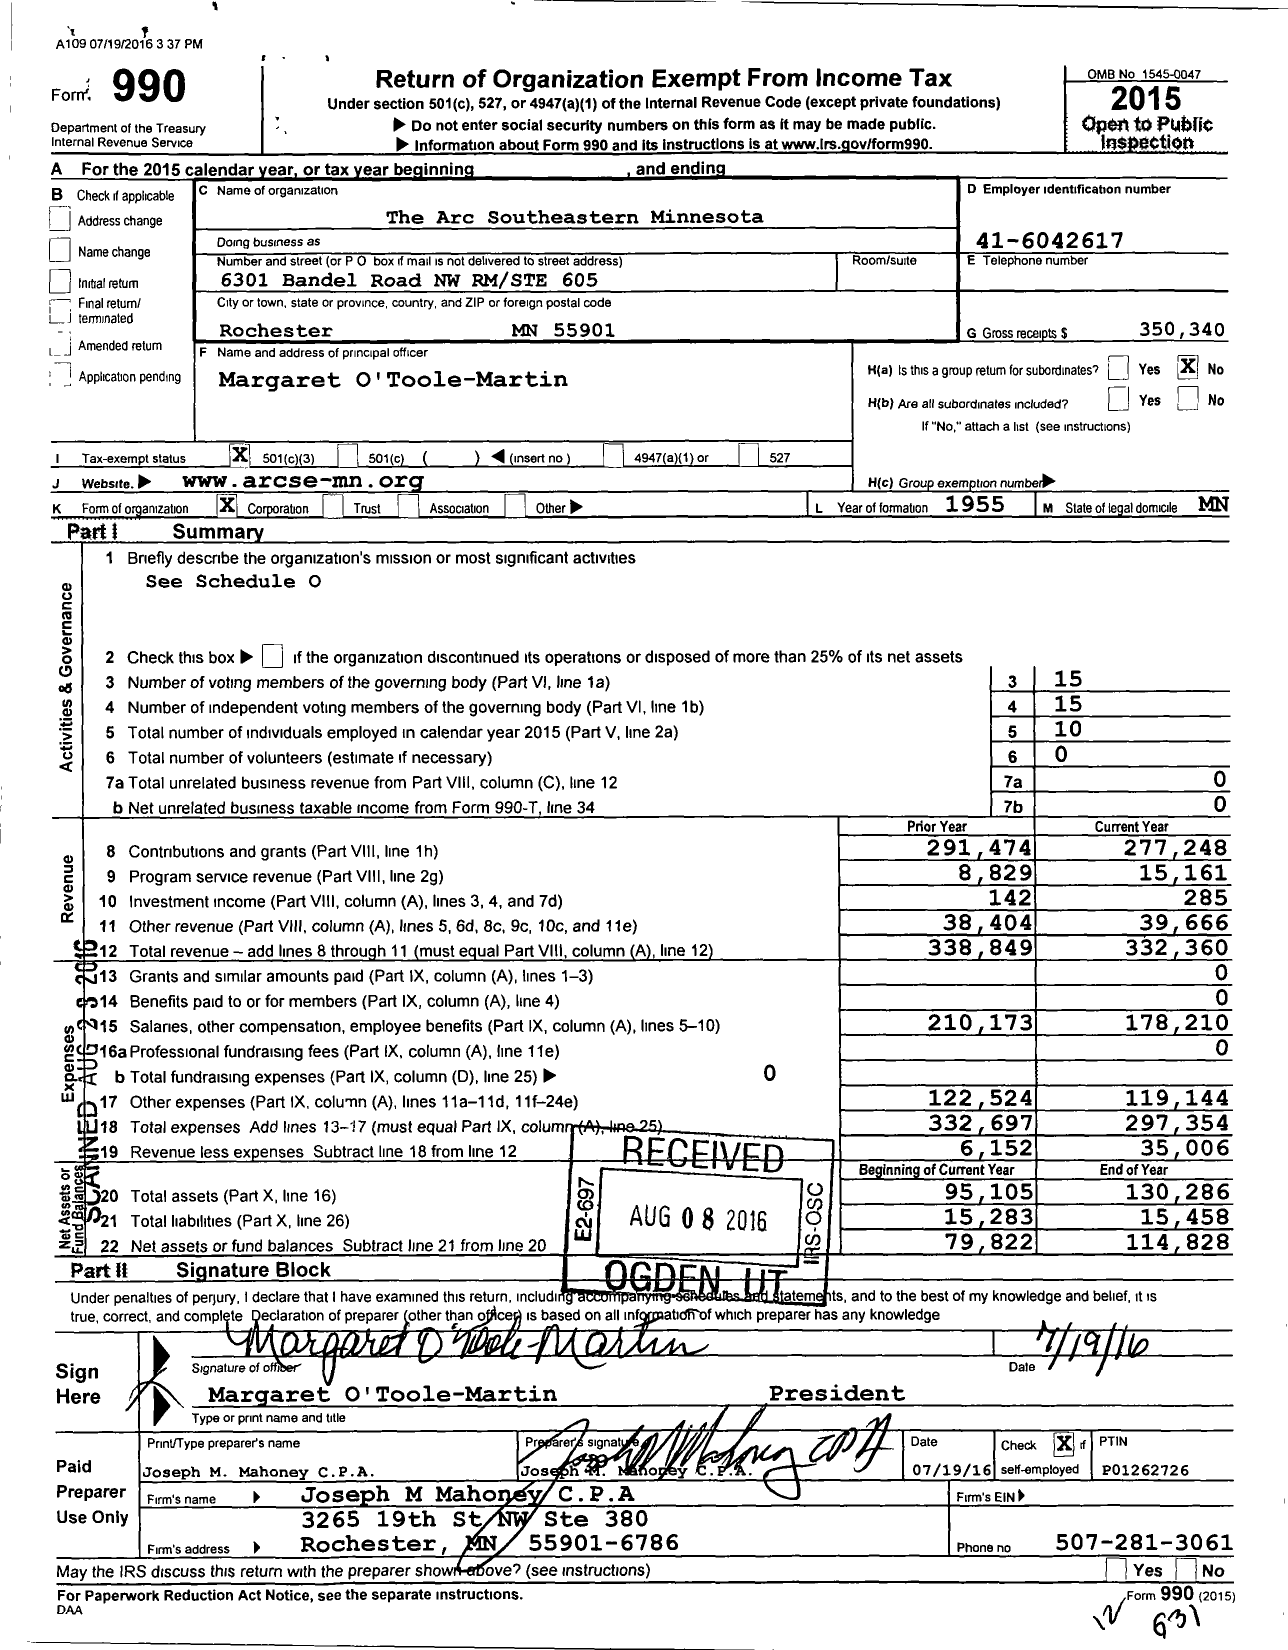 Image of first page of 2015 Form 990 for Arc Southeastern Minnesota